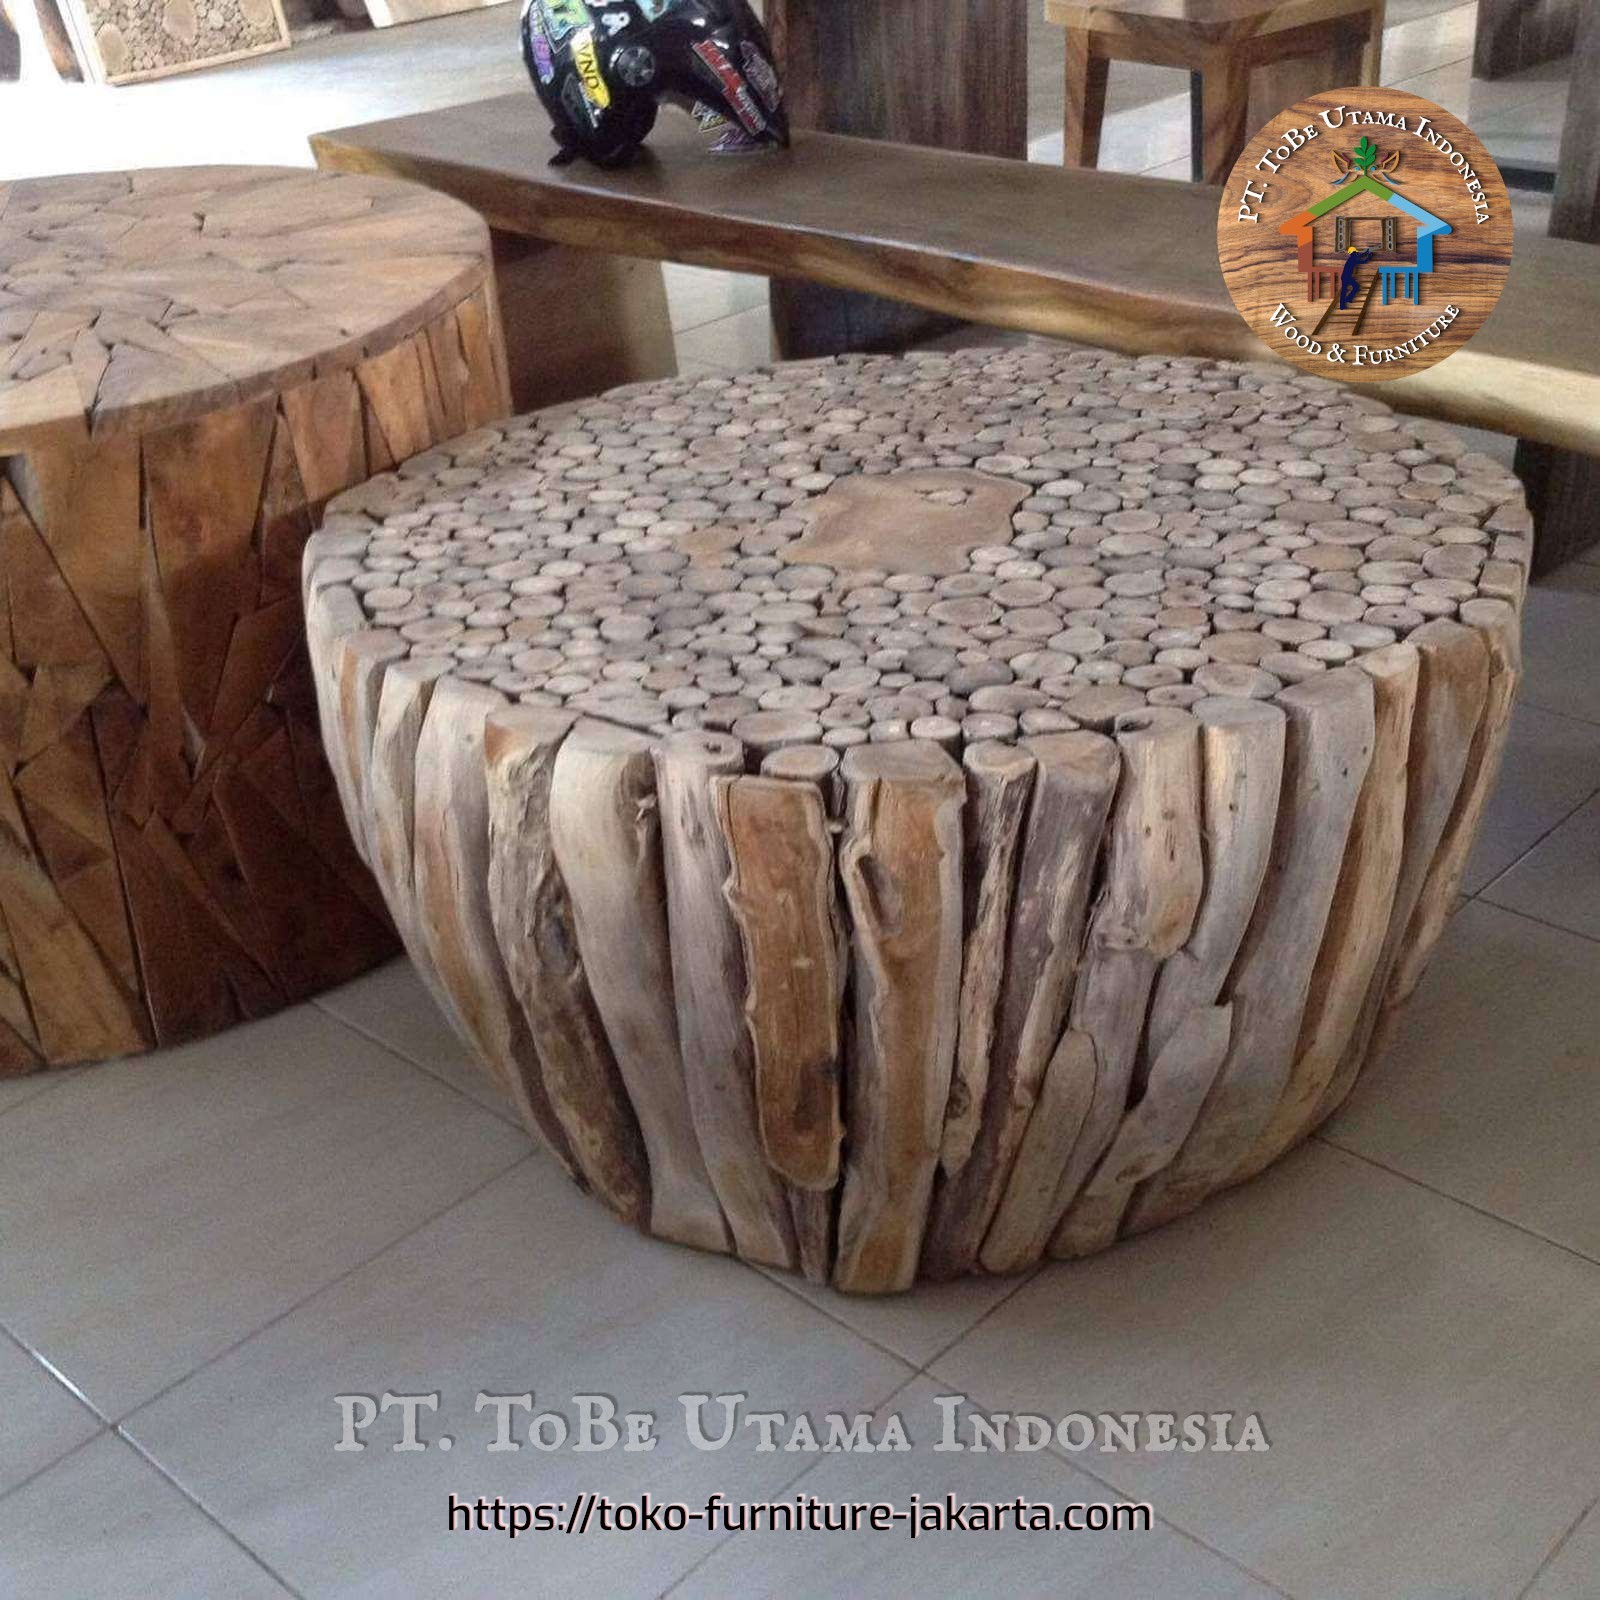 Living Room - Coffee Tables: River Root Table Raya made of root (image 1 of 1).